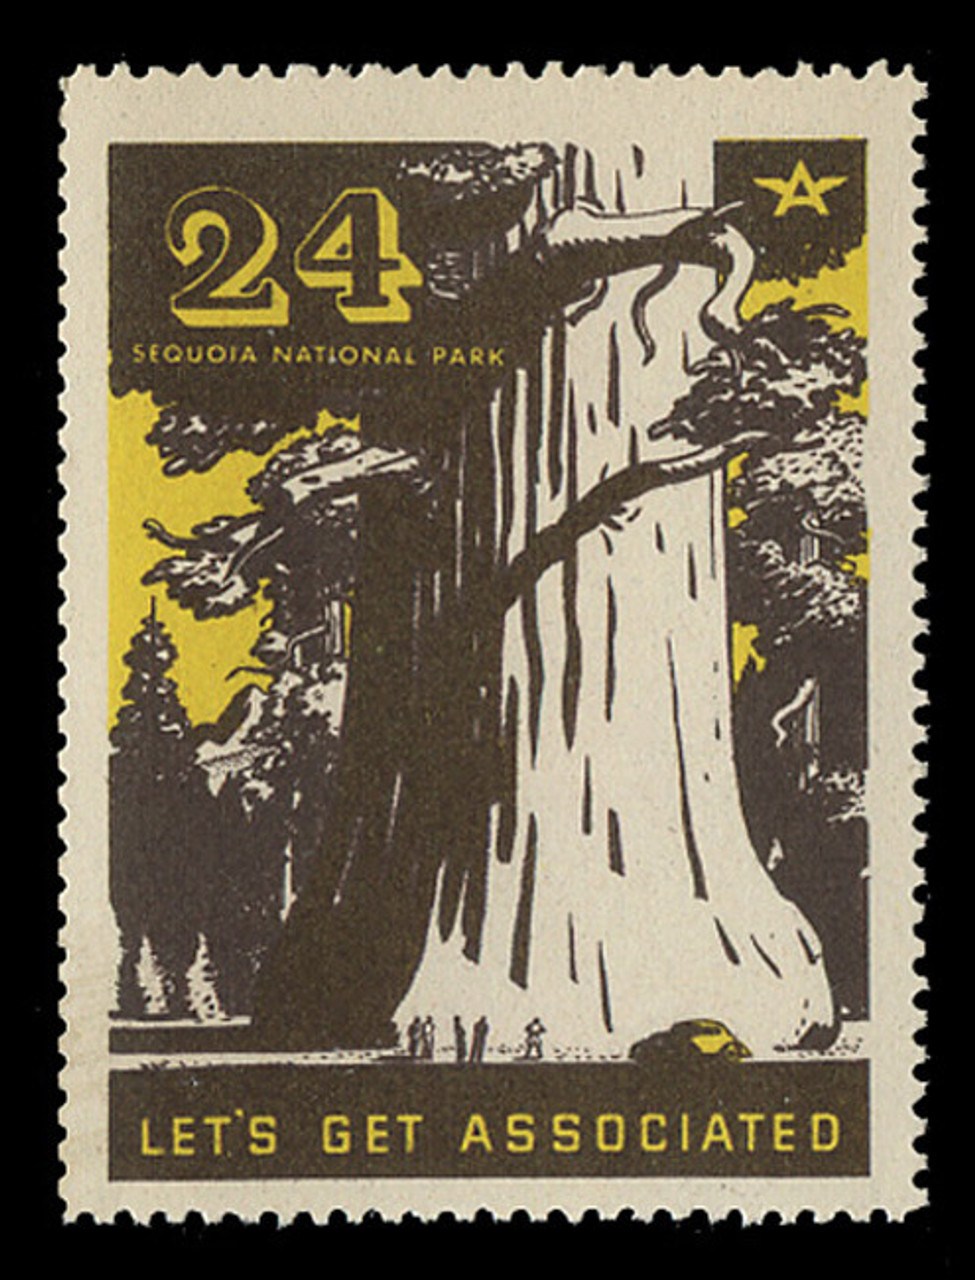 Associated Oil Company Poster Stamps of 1938-9 - # 24, Sequoia National Park